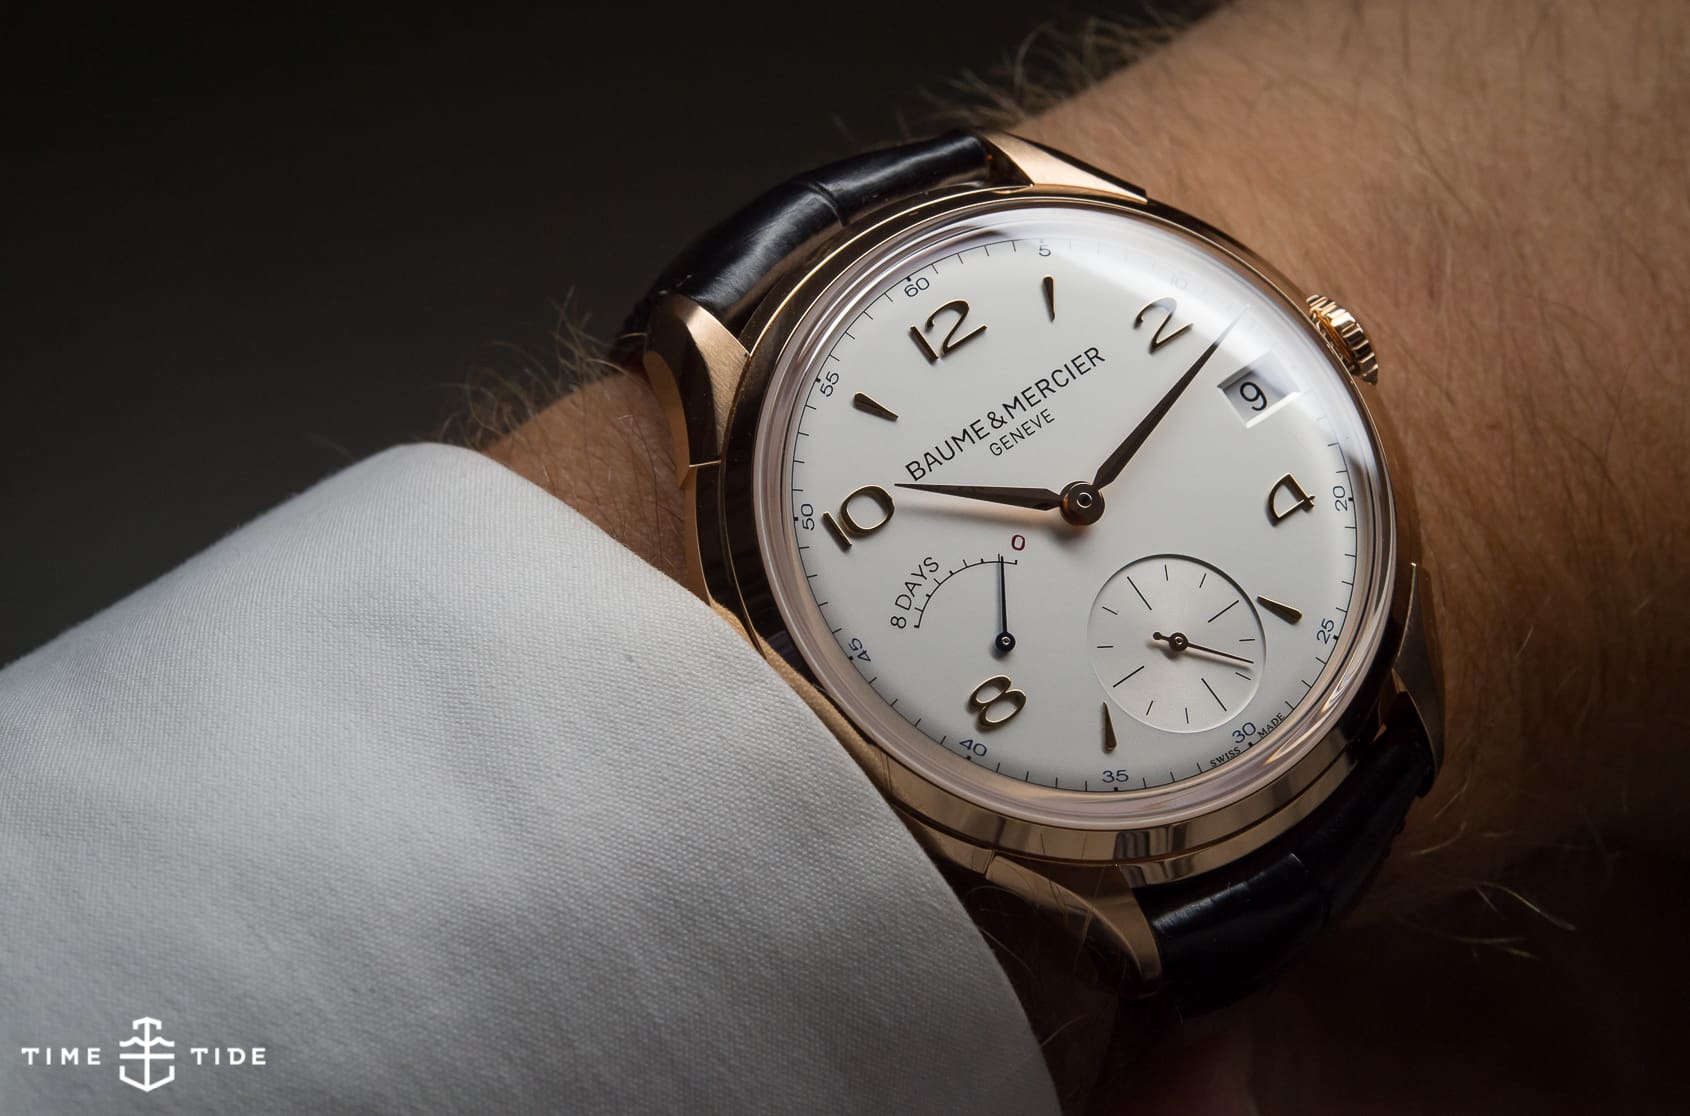 HANDS ON: The Baume & Mercier Clifton 8-Day Power Reserve